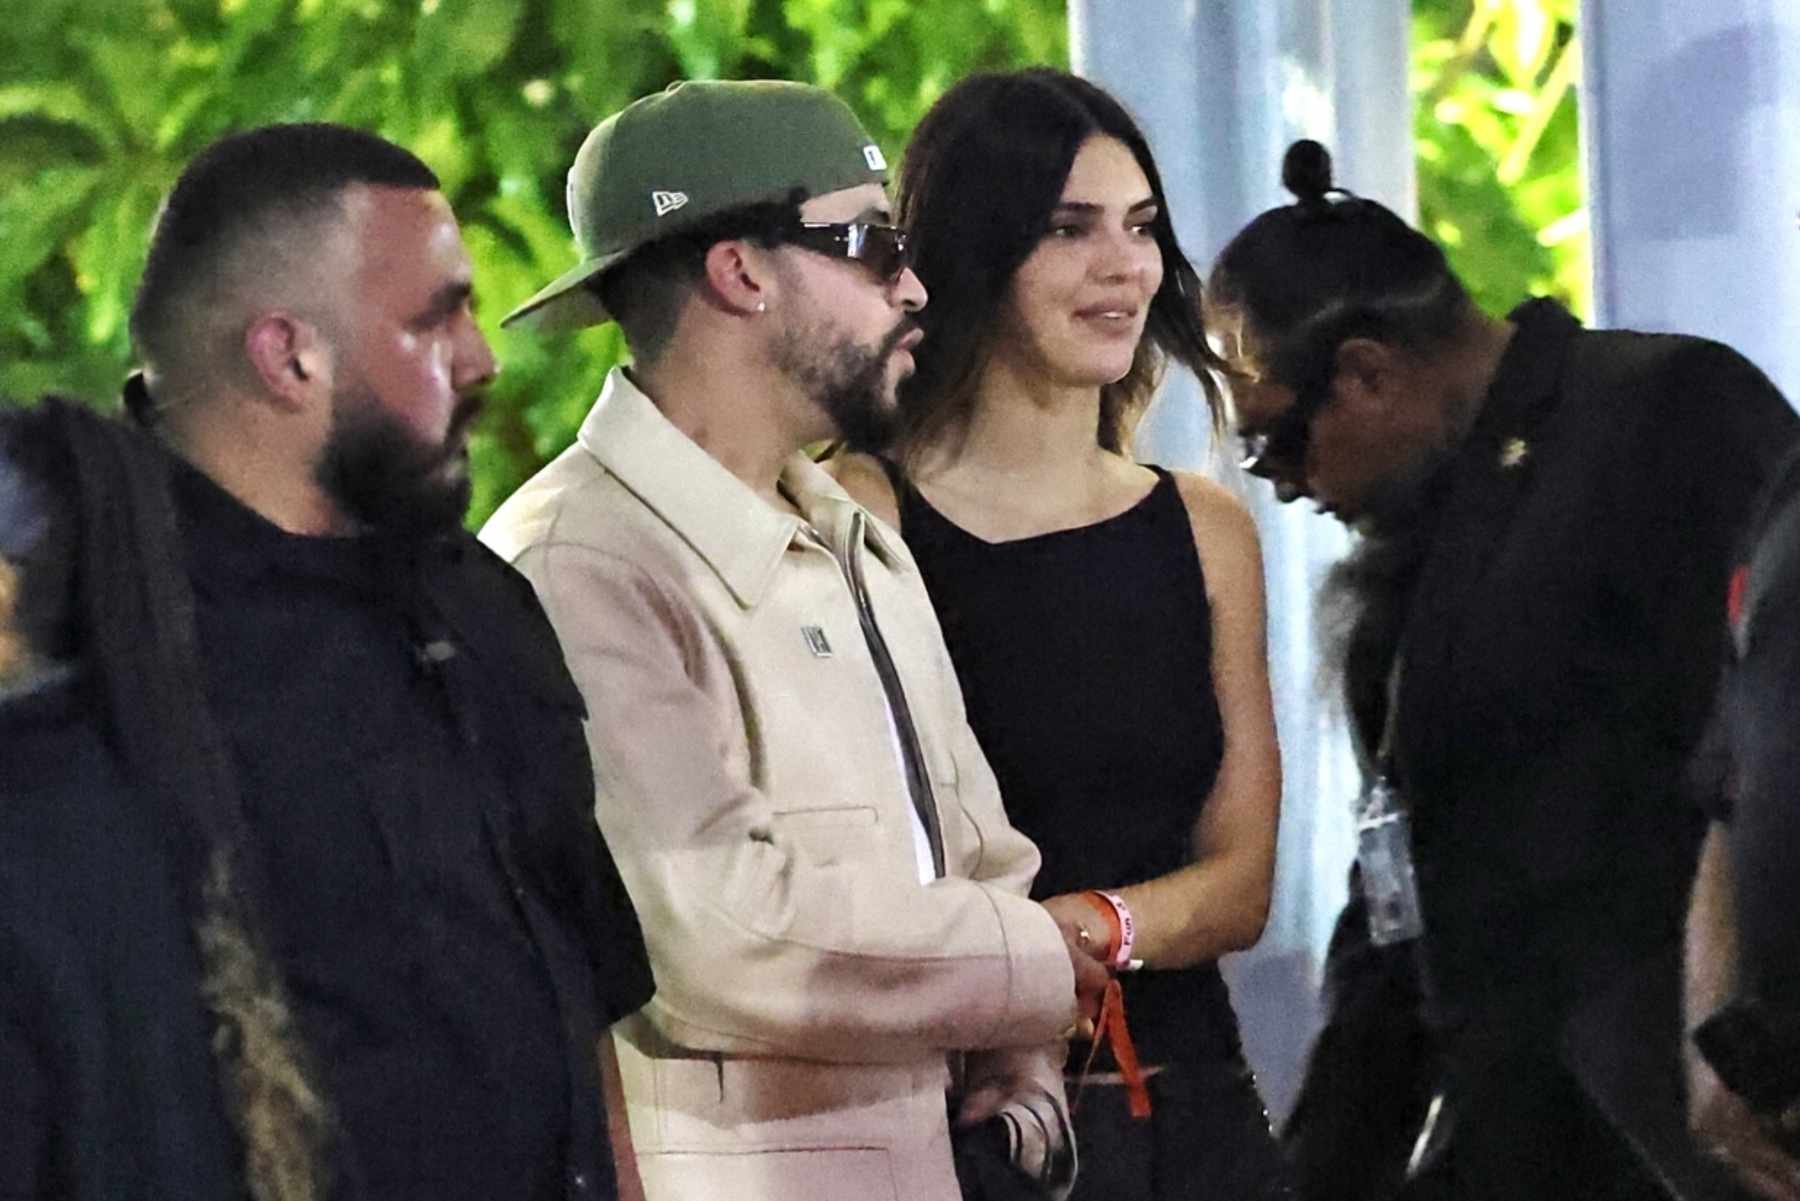 kendall jenner & bad bunny wear black leather pants to Drake's "It's All a Blur" tour